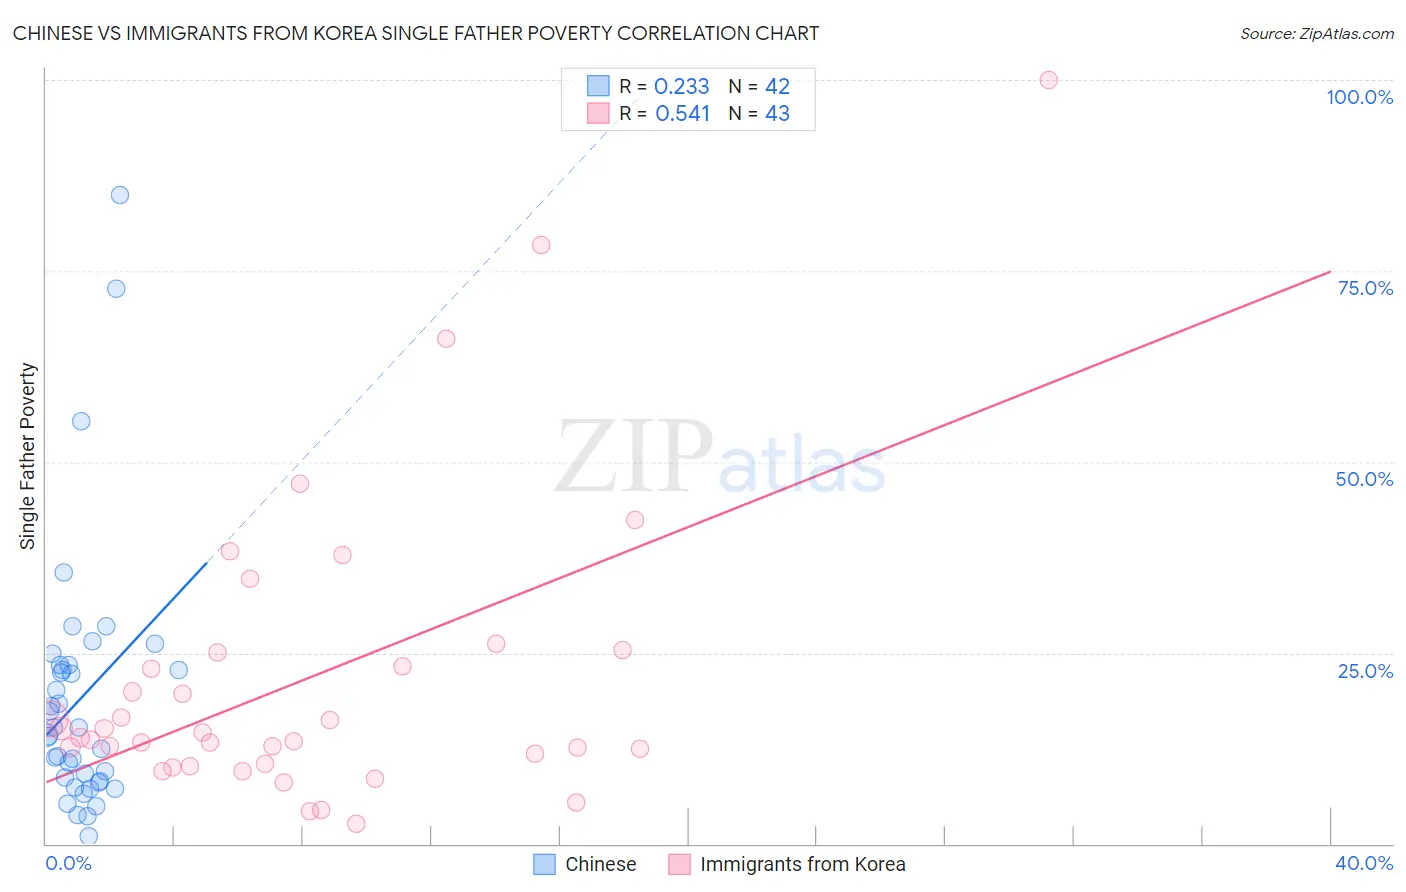 Chinese vs Immigrants from Korea Single Father Poverty